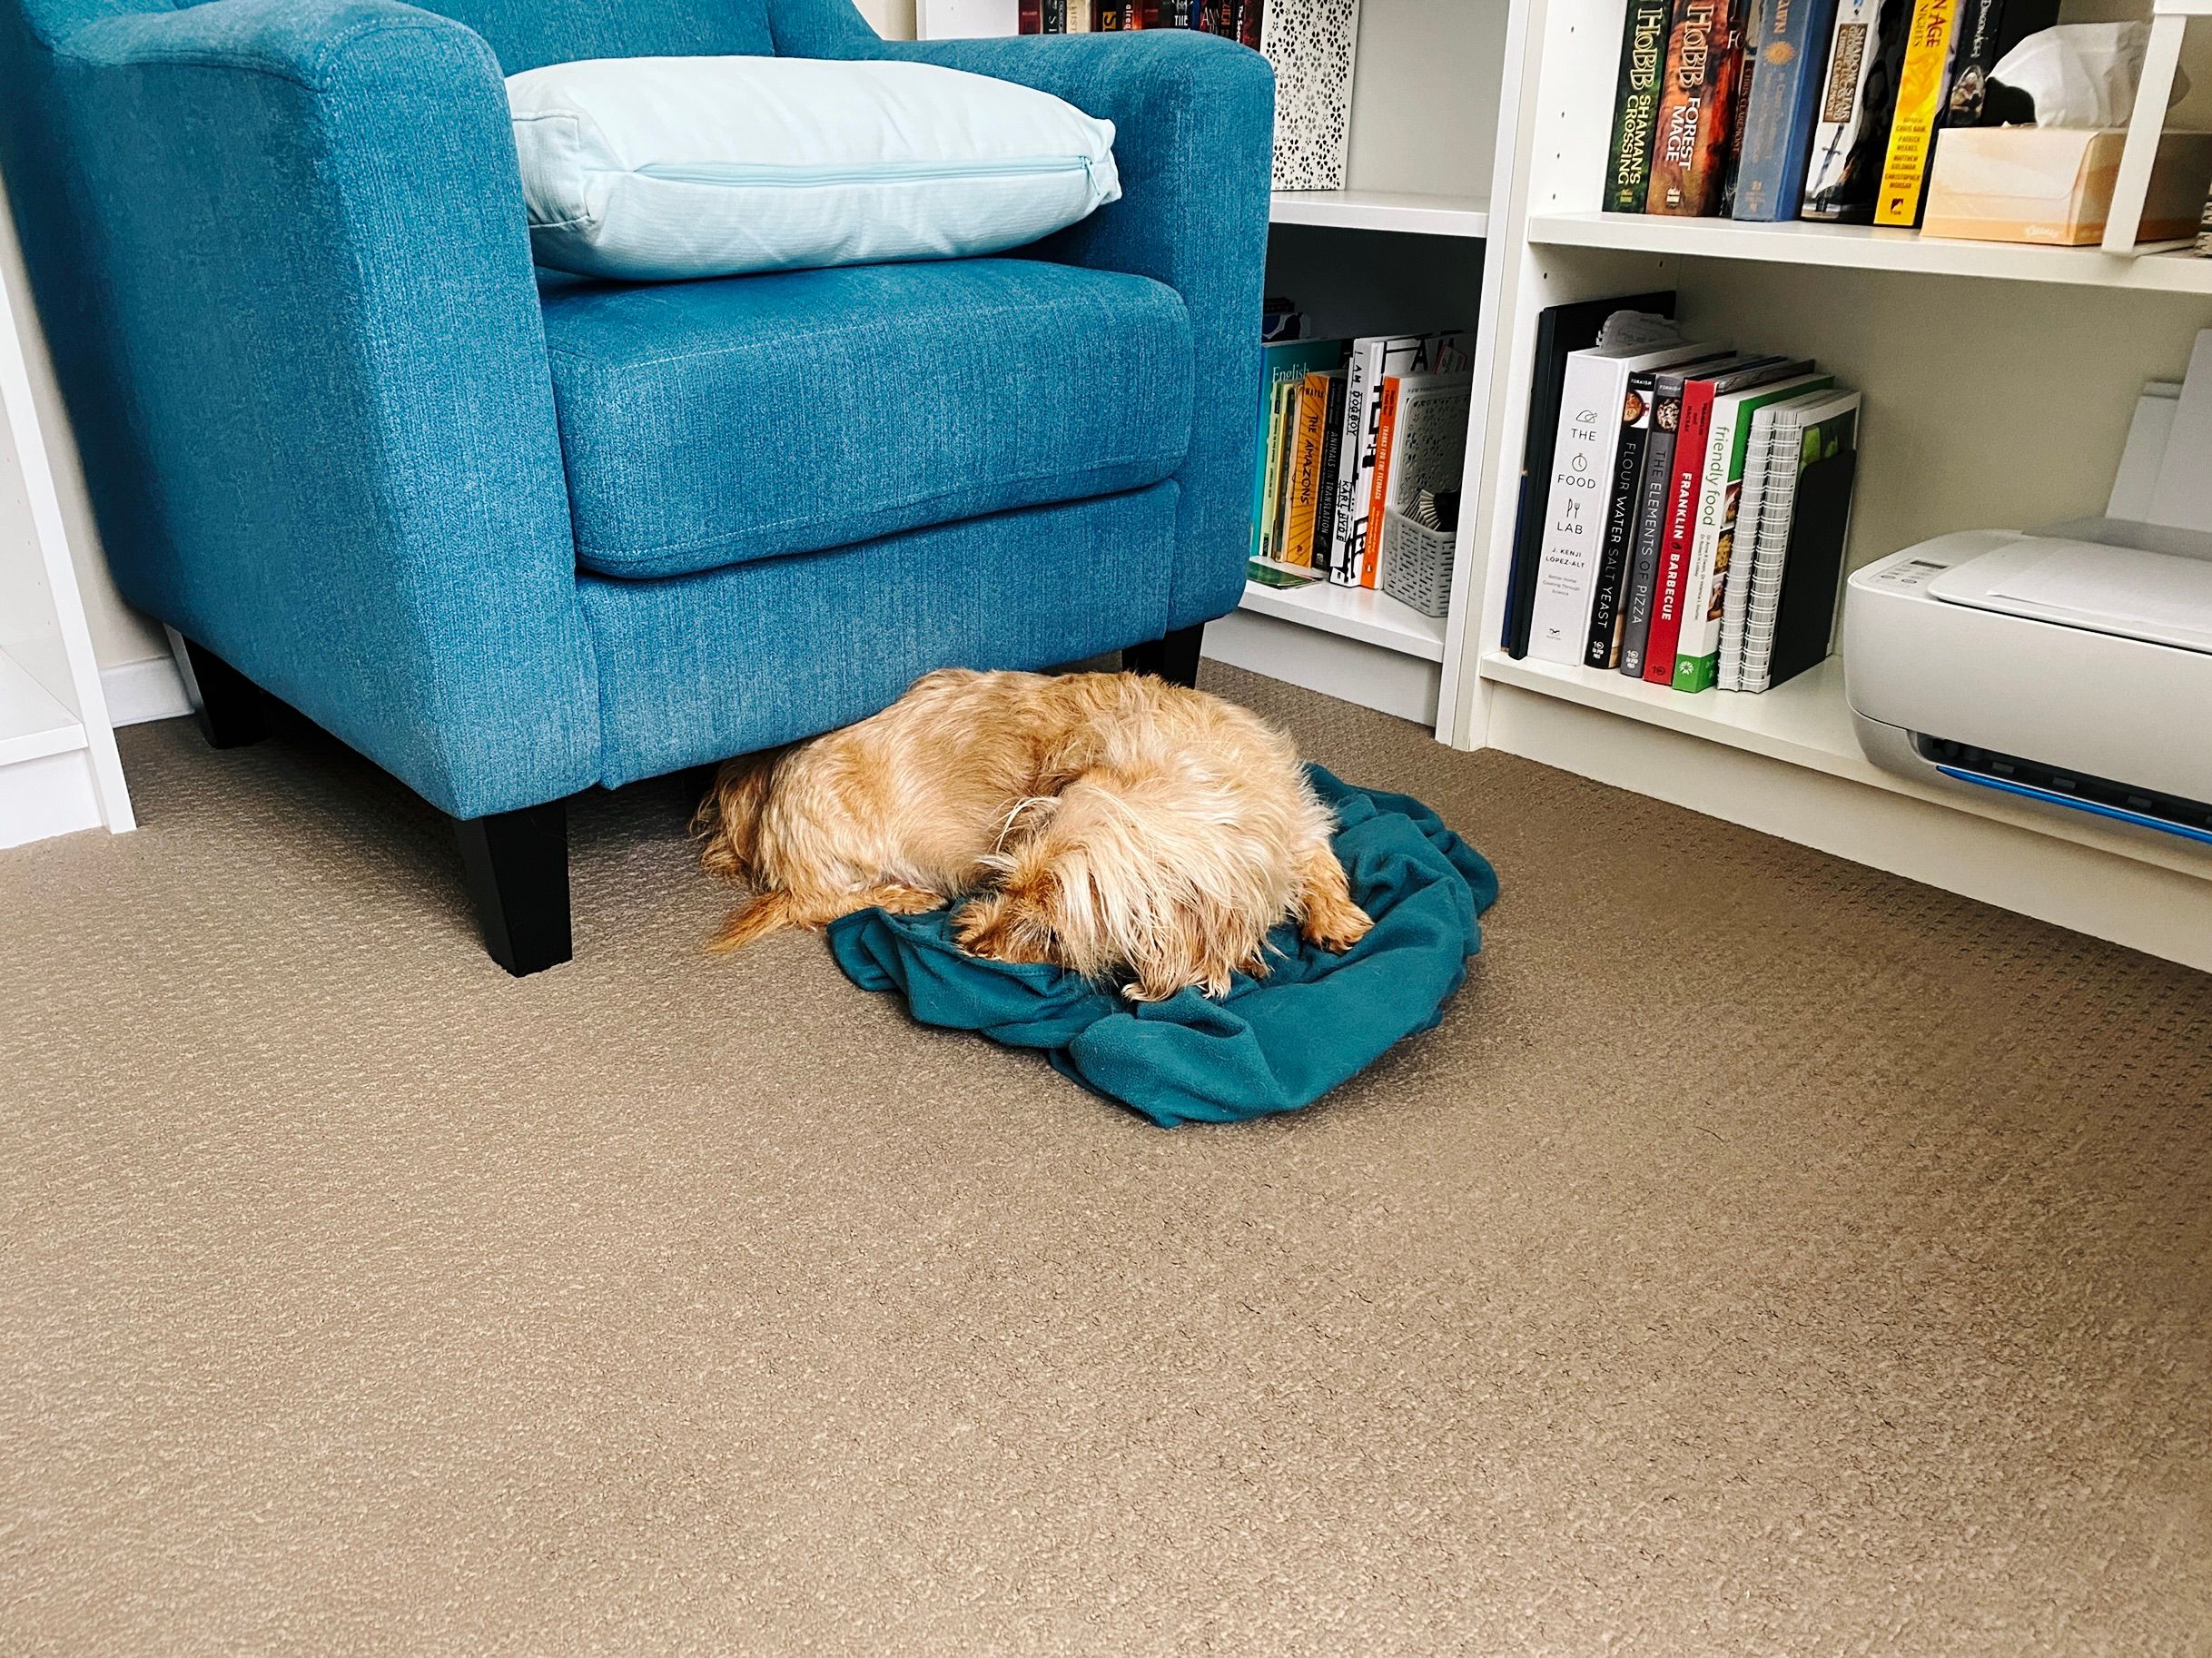 A photo of a small scruffy blonde dog lying curled up on a blanket right next to an armchair, with his back end under the gap between the bottom of the chair and the floor.